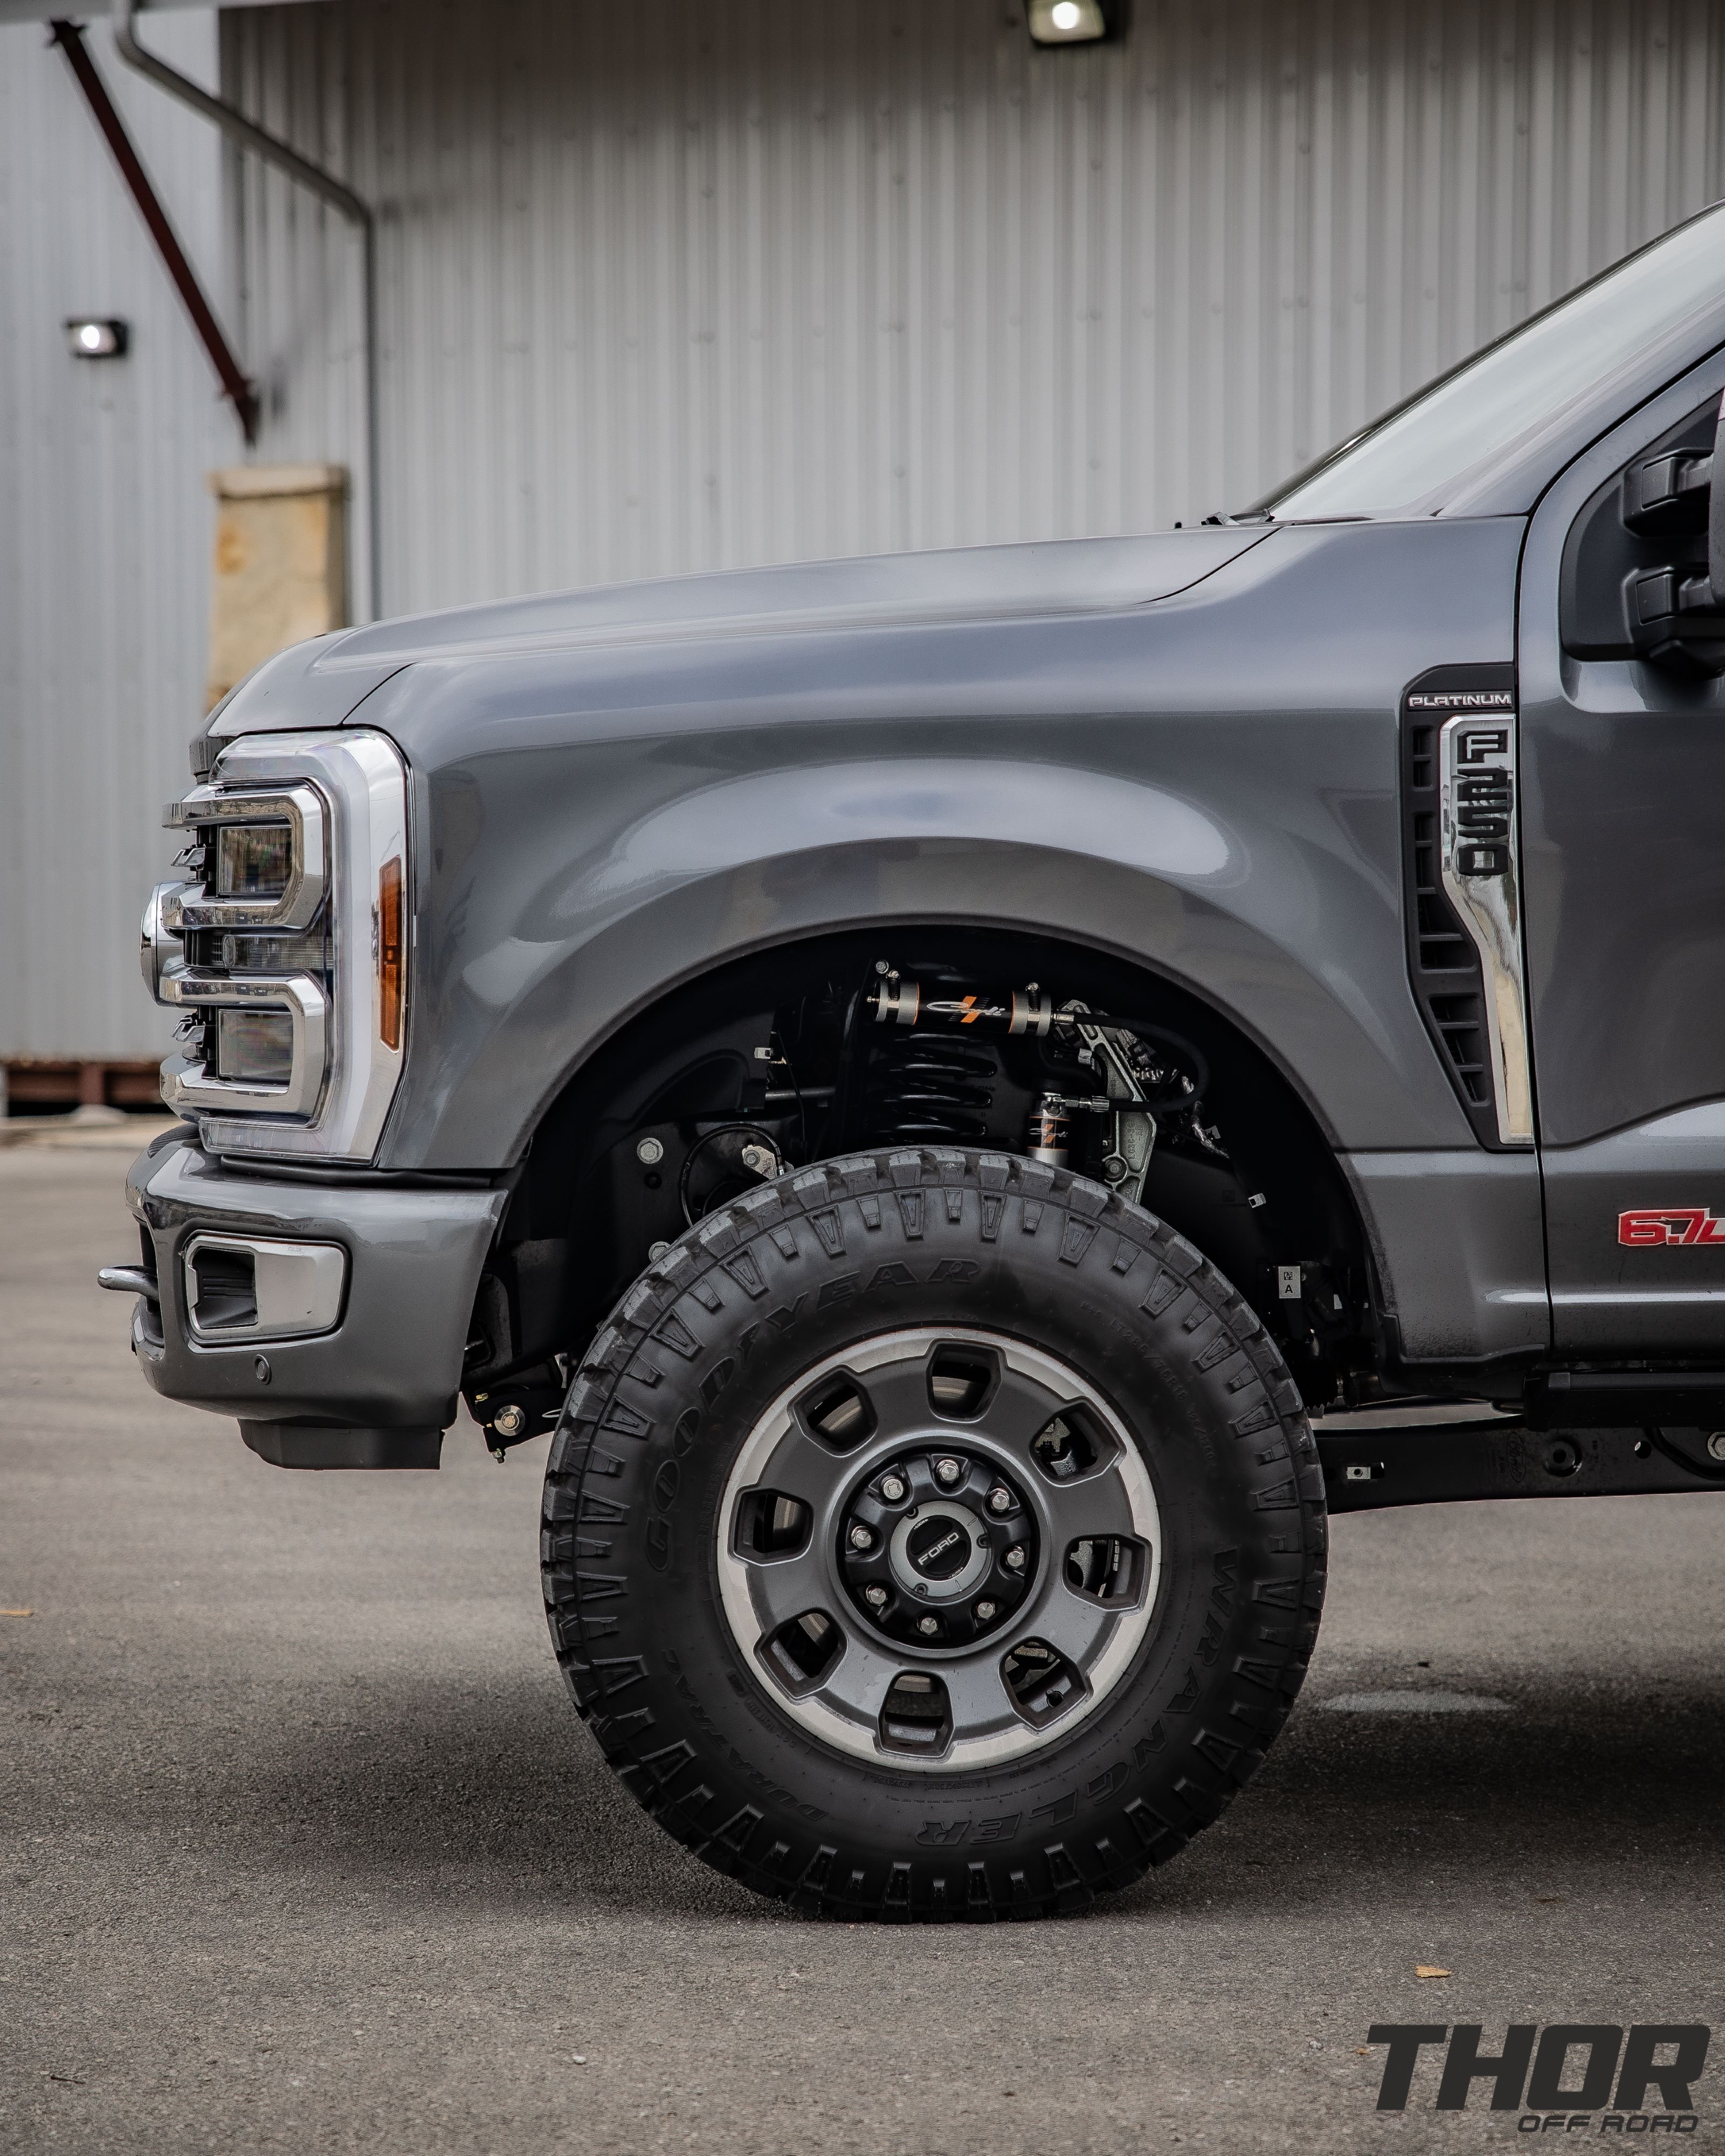 2024 Ford F-250 Super Duty Platinum in Gray with Carli Backcountry 3.5" Suspension Kit, Carli 3.5" Full Rear Spring Replacement, Carli Torsion Sway Bar 3.5"